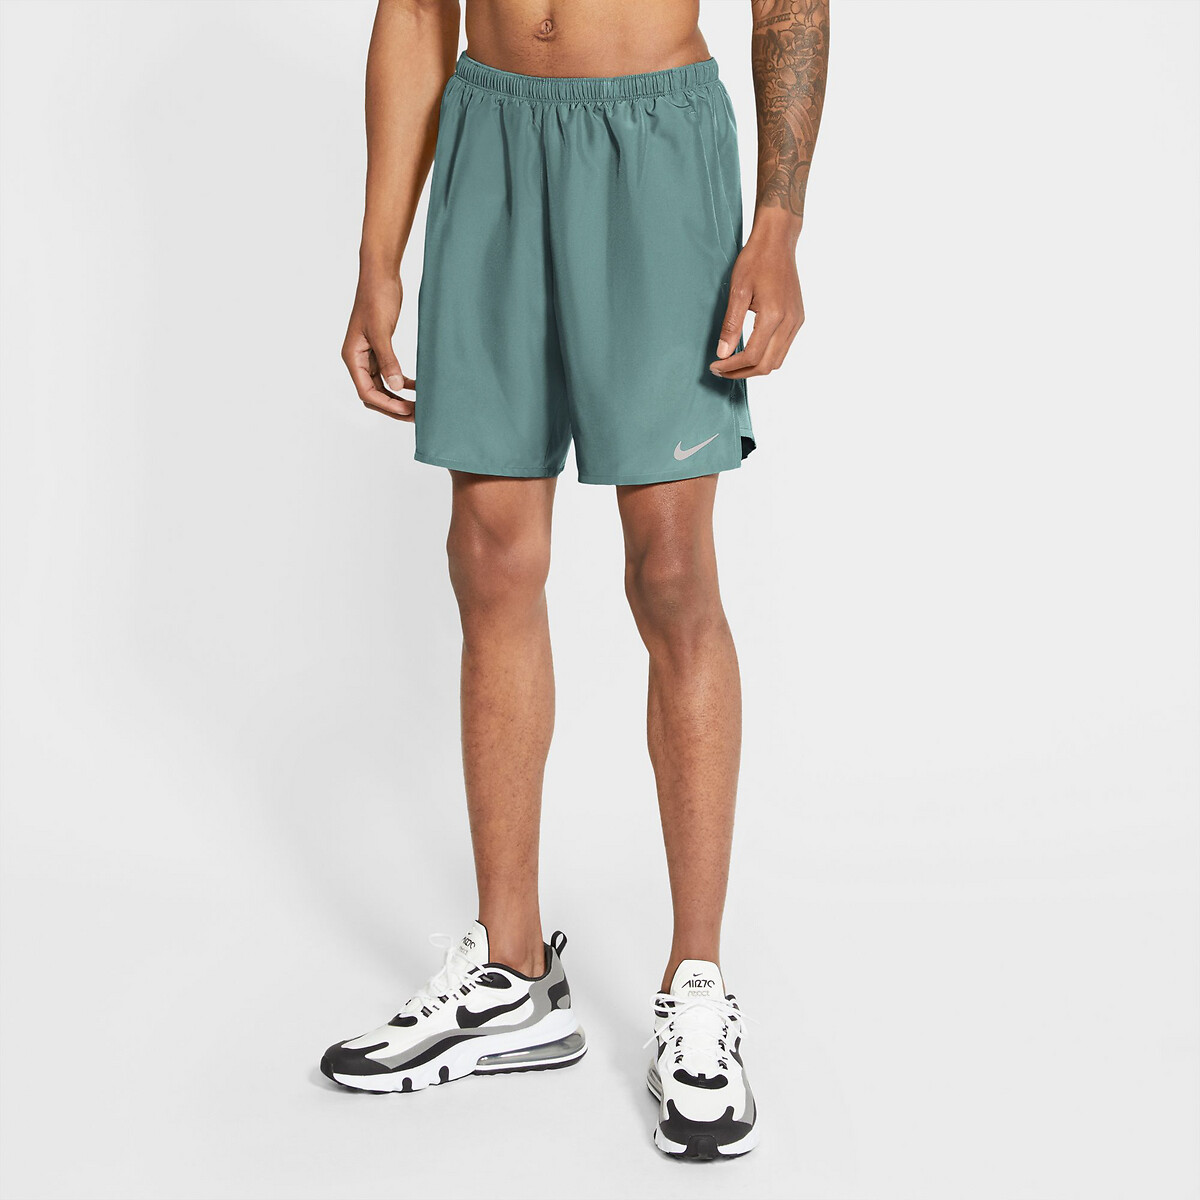 Challenger 2-in-1 running shorts , green, Nike | La Redoute